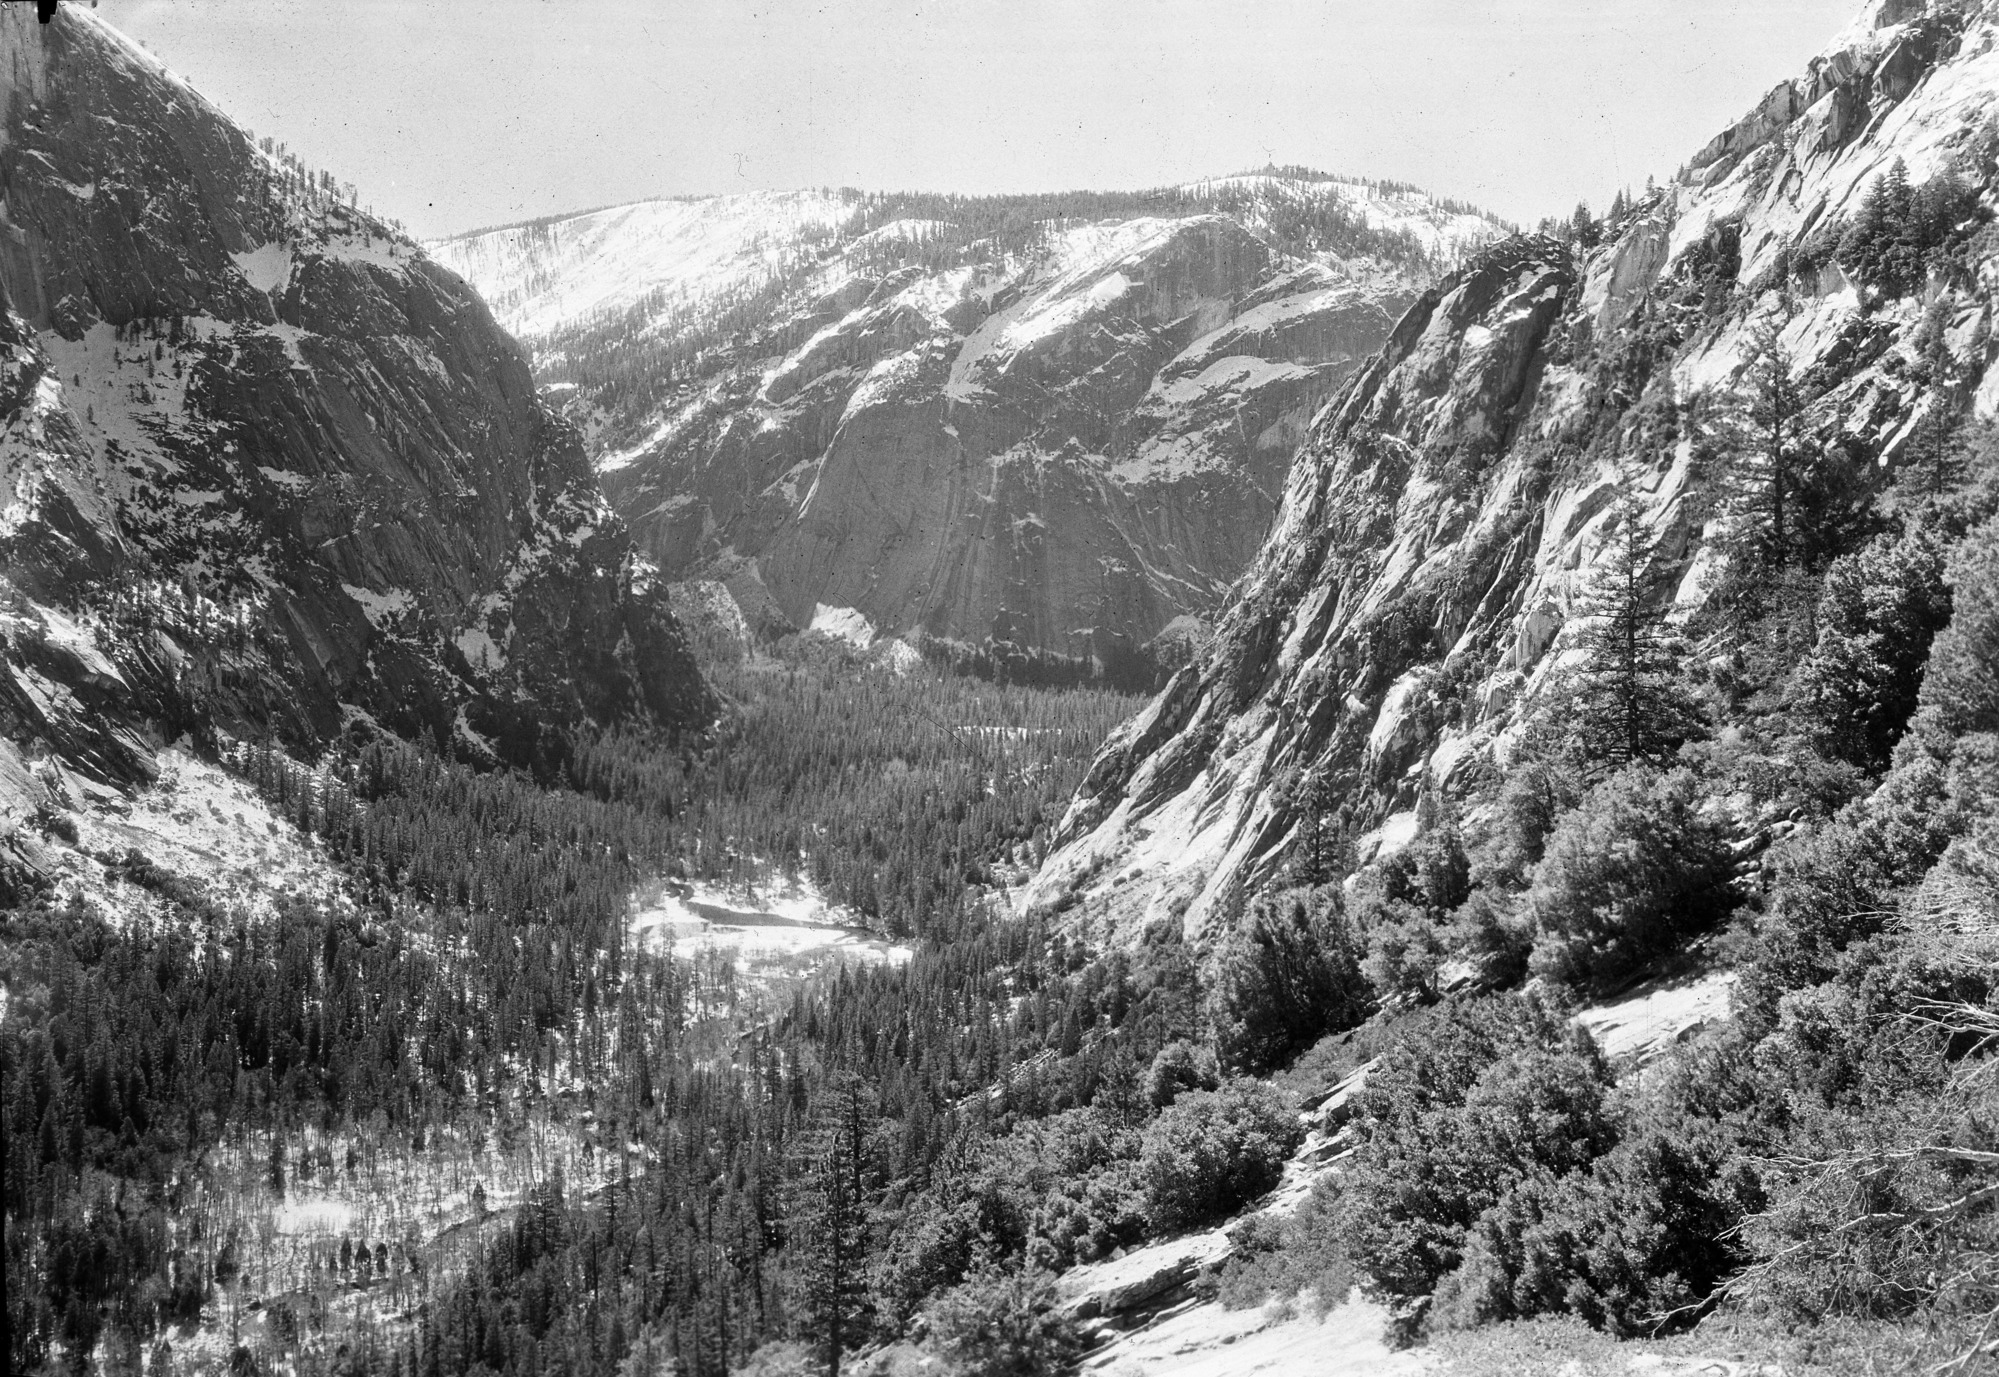 Glacier Point and Valley from near the Snow Creek trail. Copy Neg: Leroy Radanovich, June 2002